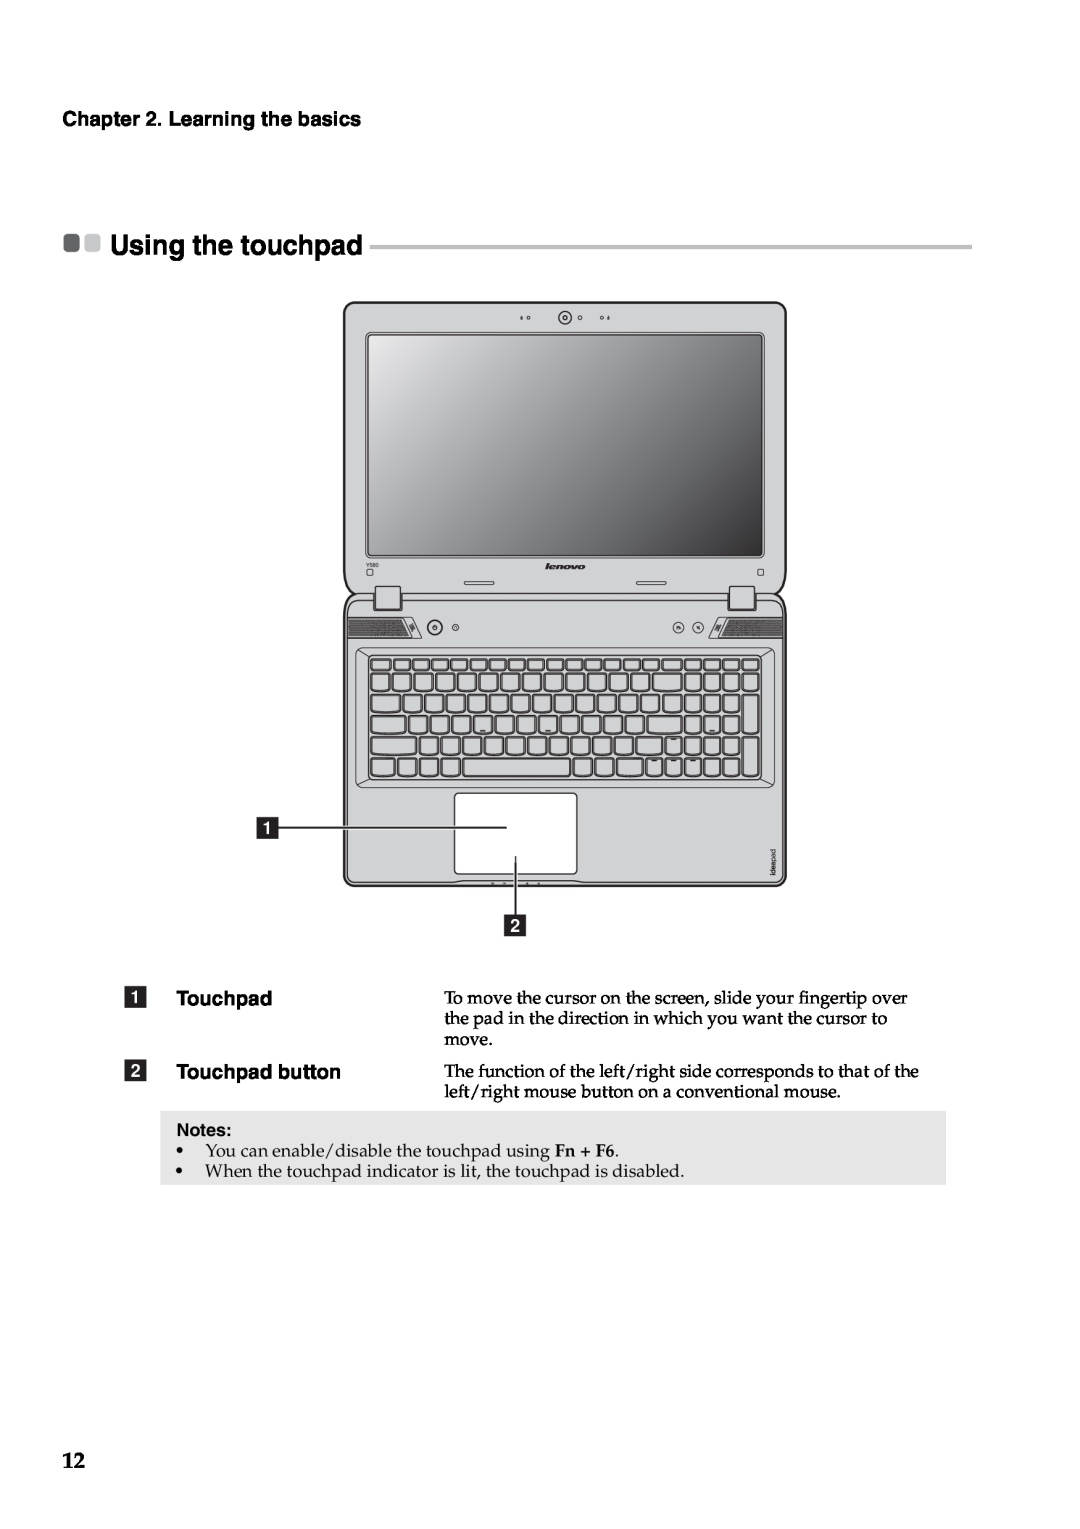 Lenovo Y580, Y480 manual Using the touchpad, Touchpad button, Learning the basics 